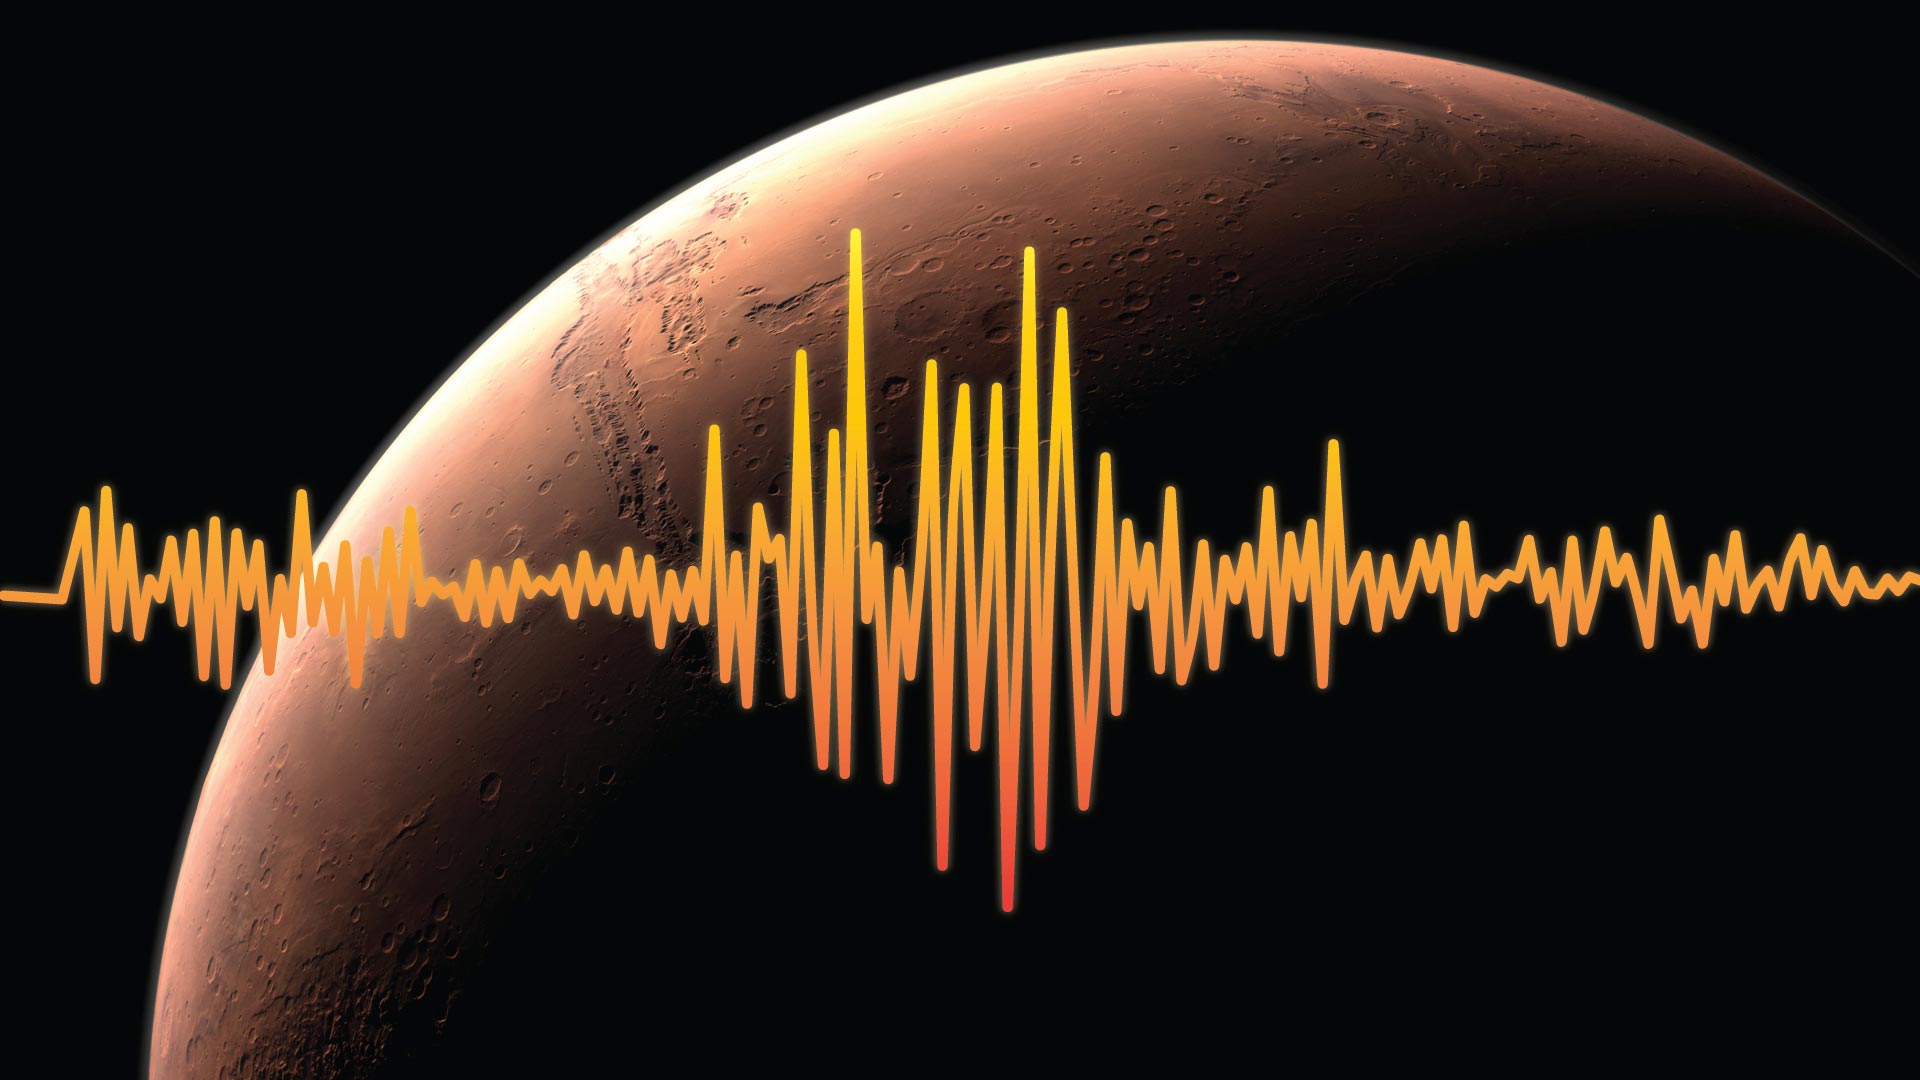 Researchers Hear Terrible Sounds on Mars